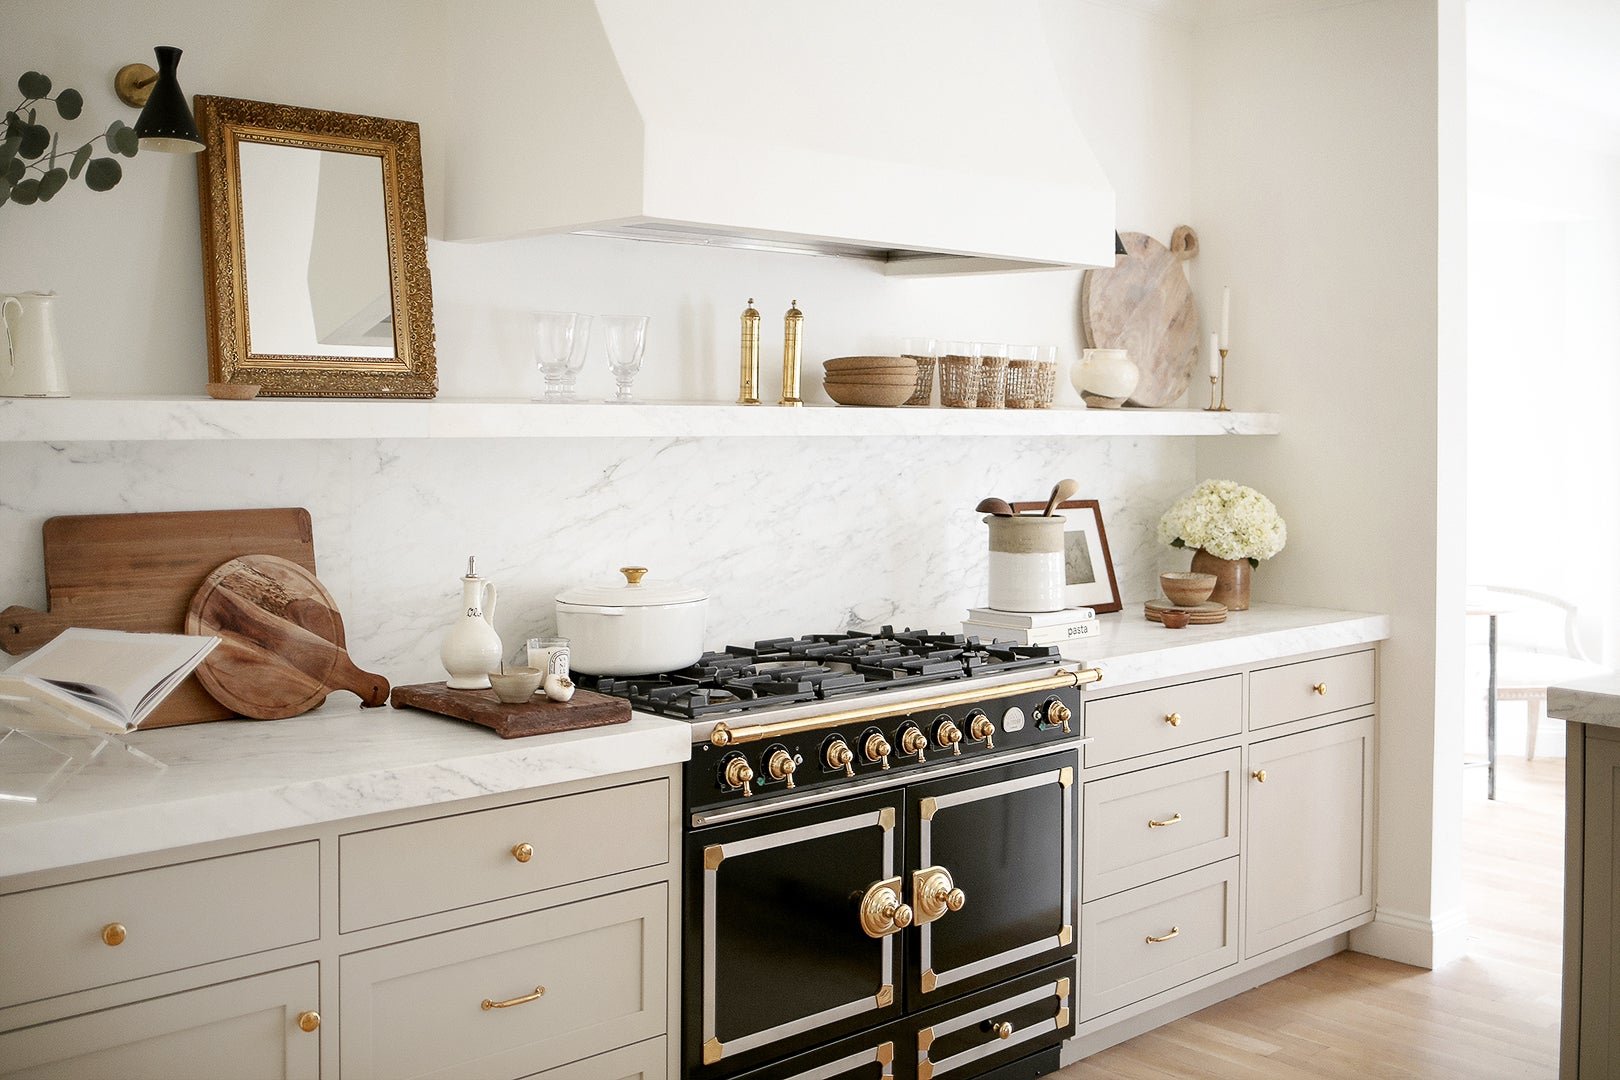 6 Decisions That Took This Once White Kitchen From Unremarkable to Full of Warmth